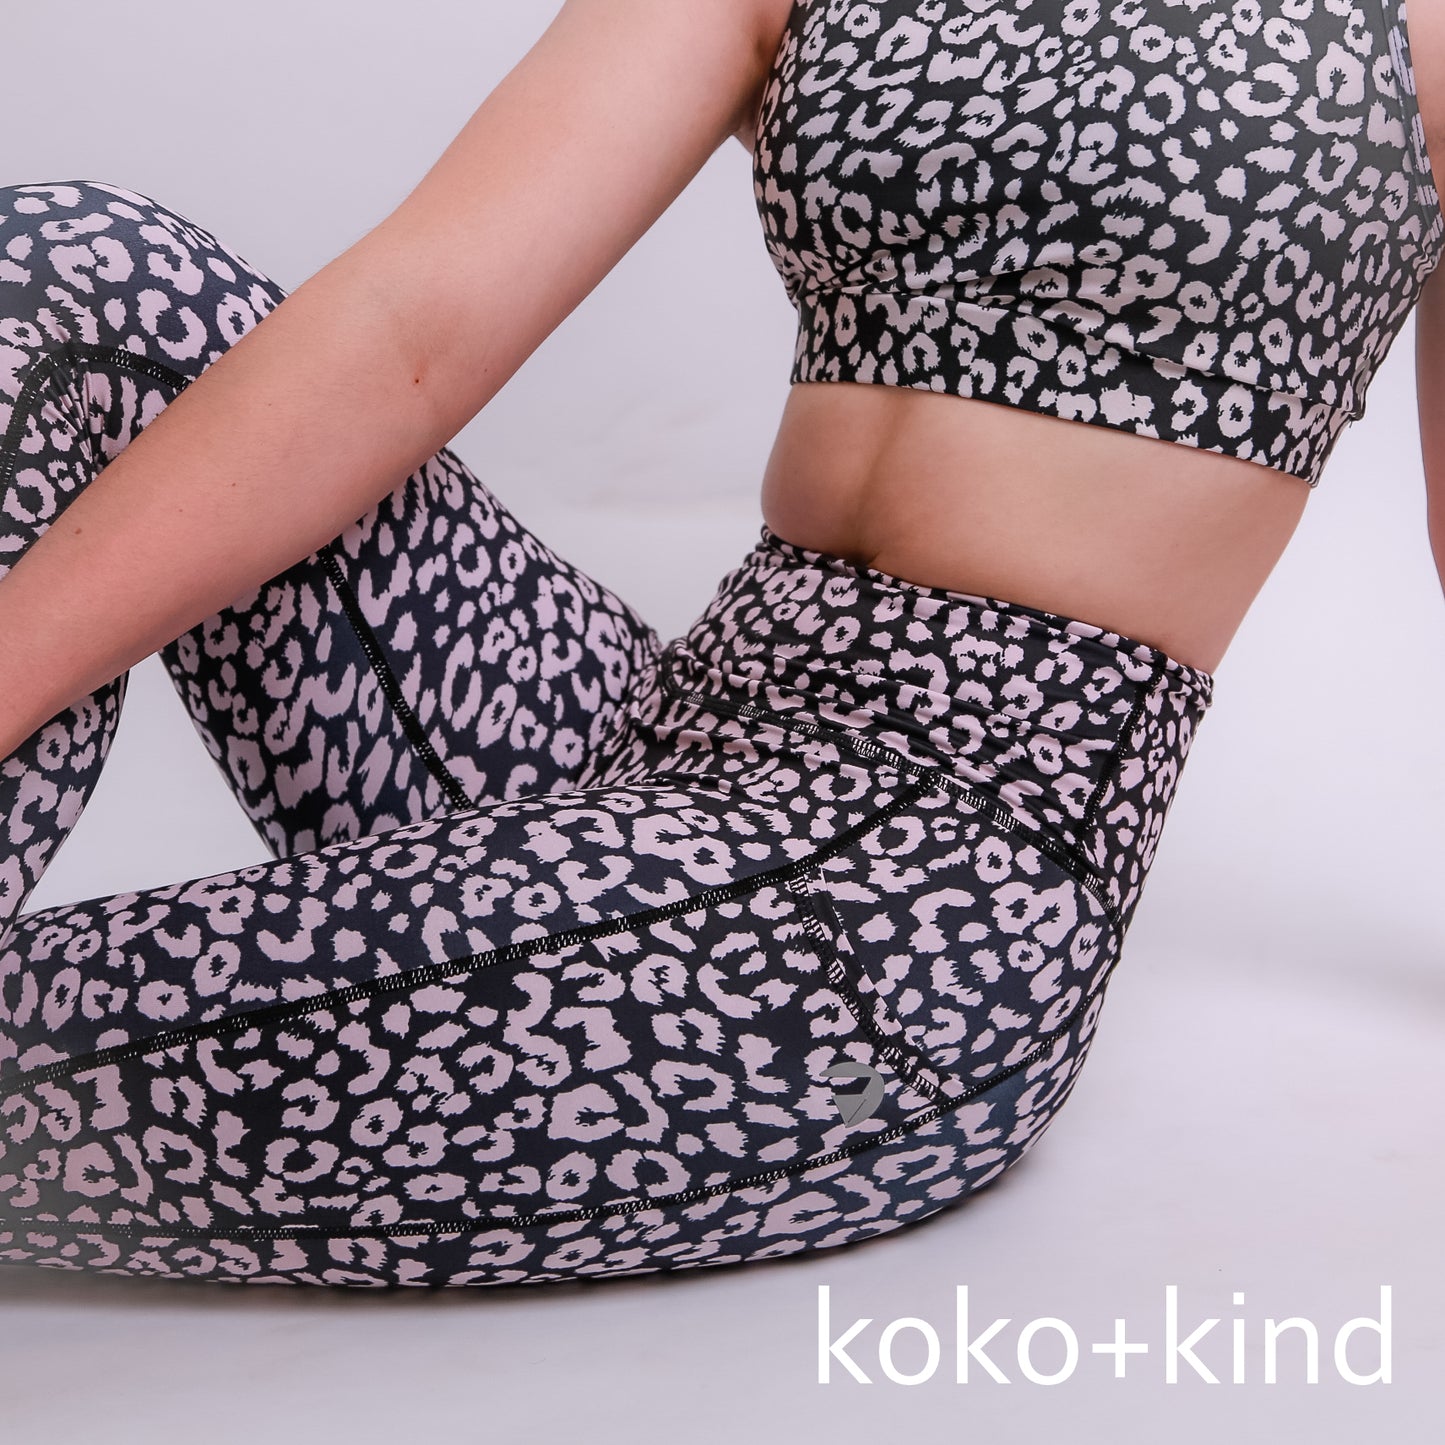 Leopard Print Activewear for Runners